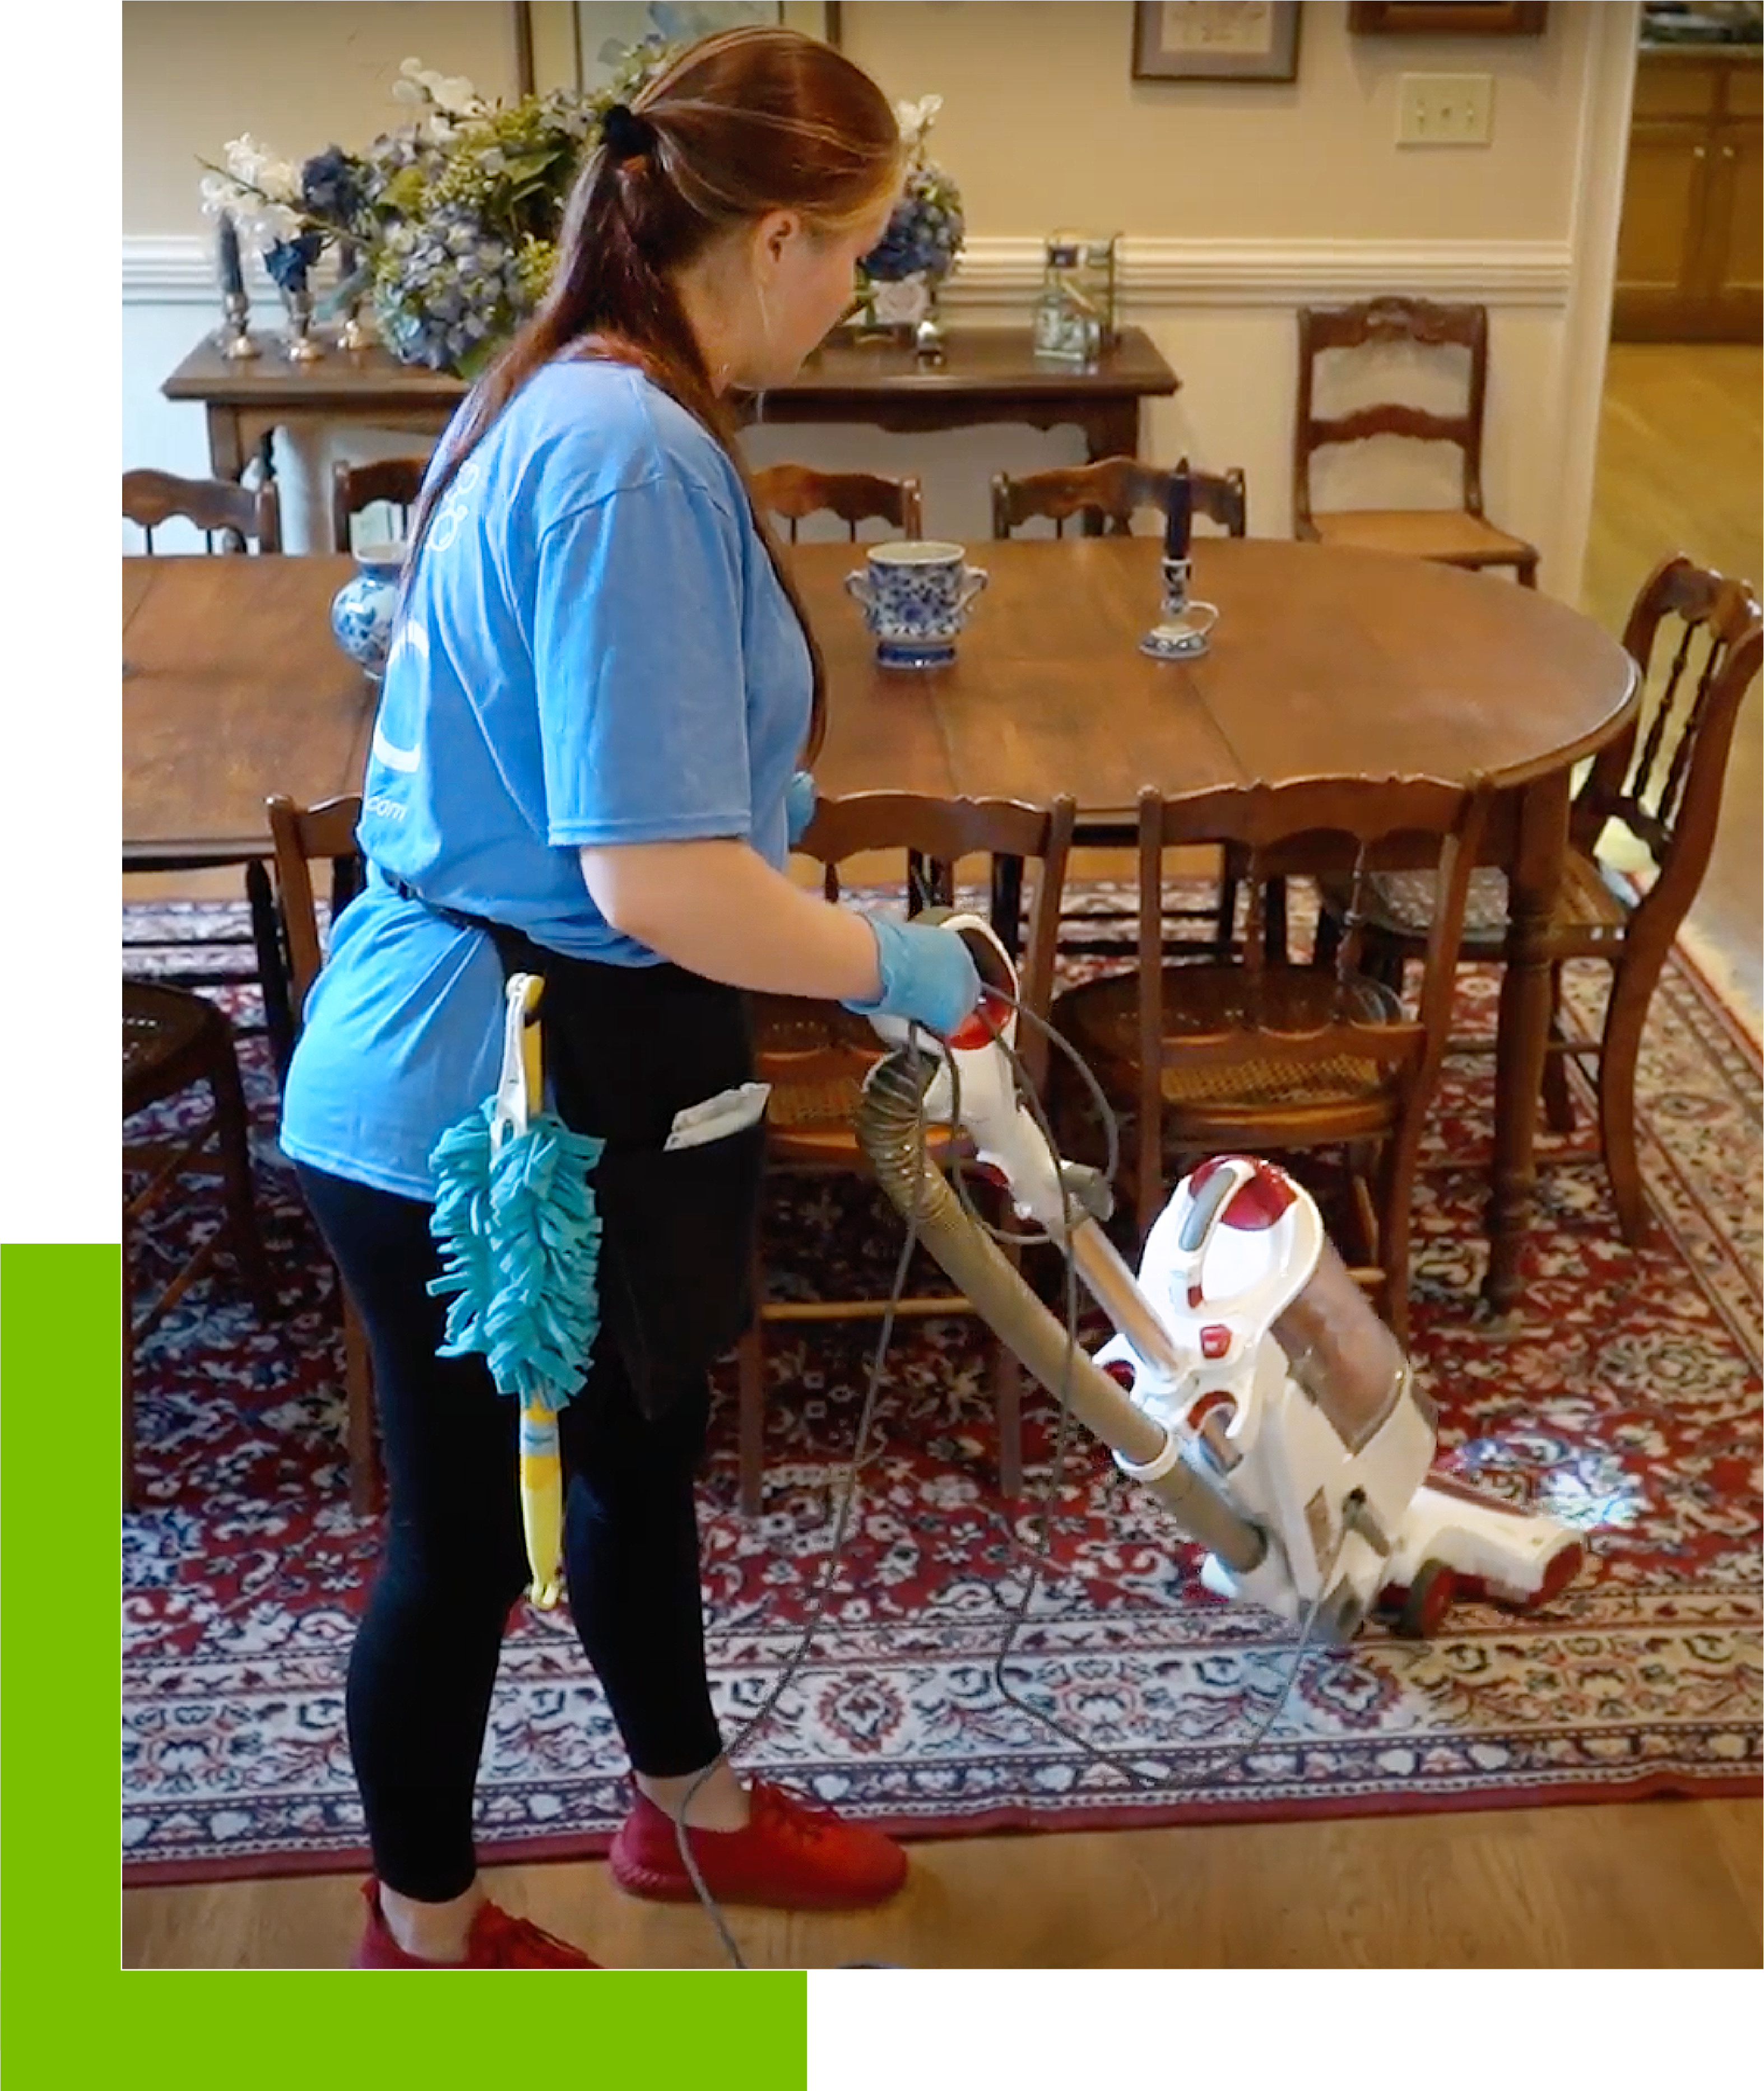 Looking for house cleaning services near me in McDonough, GA?